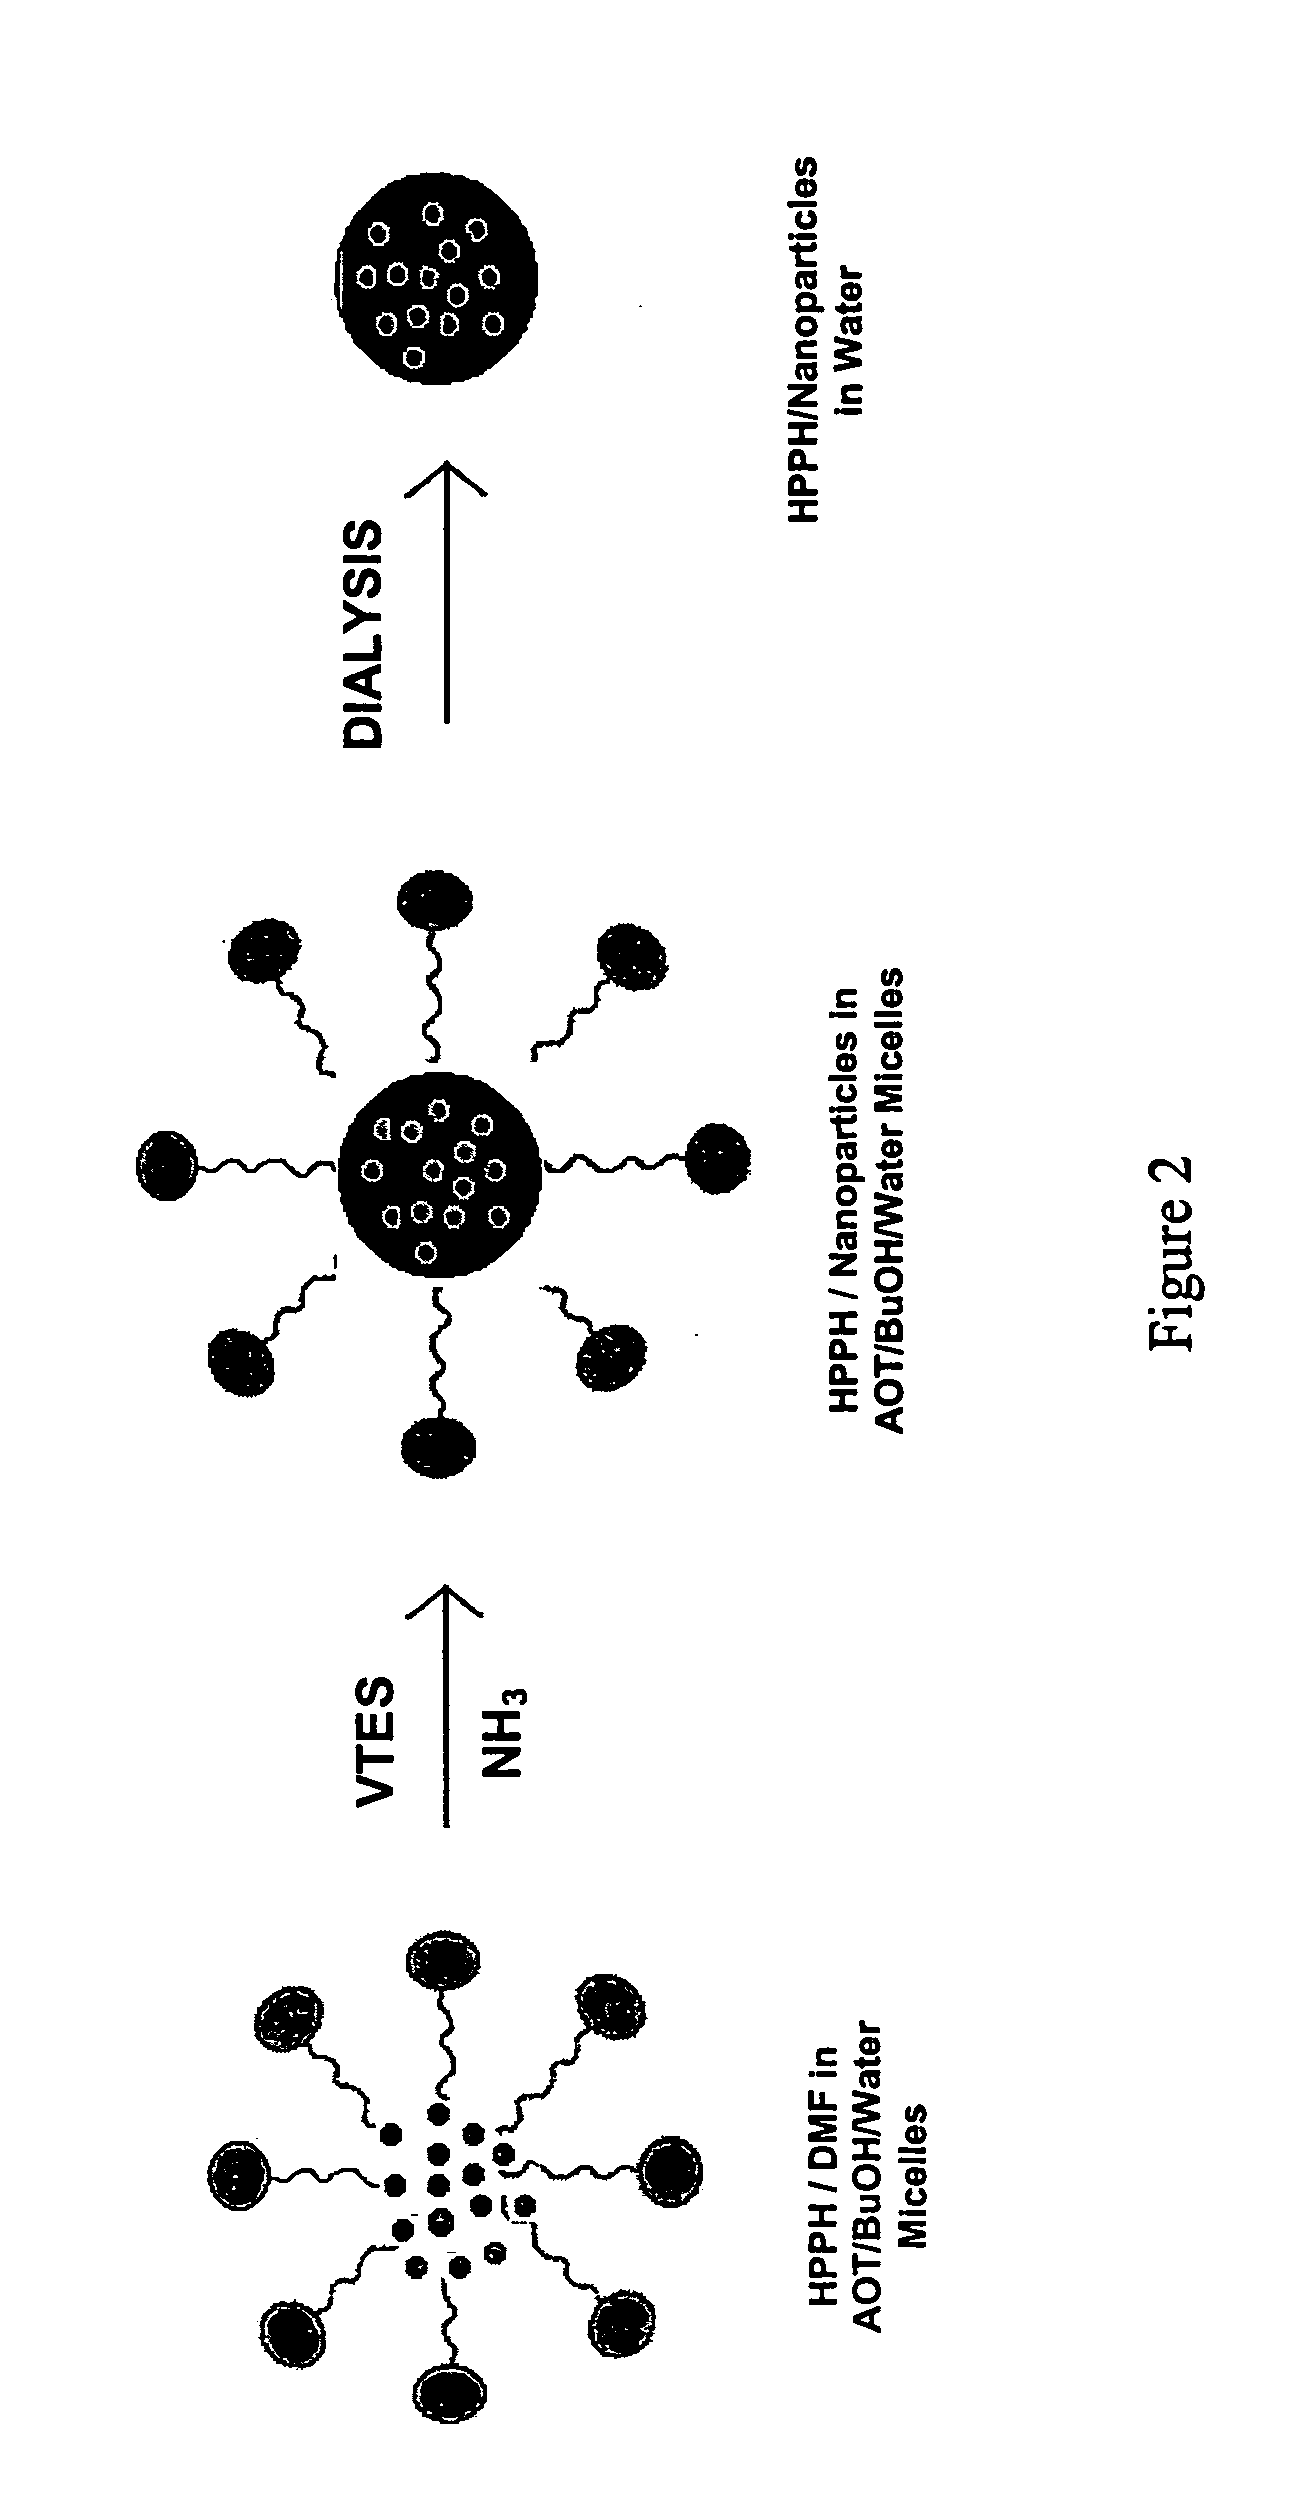 Ceramic based nanoparticles for entrapping therapeutic agents for photodynamic therapy and method of using same